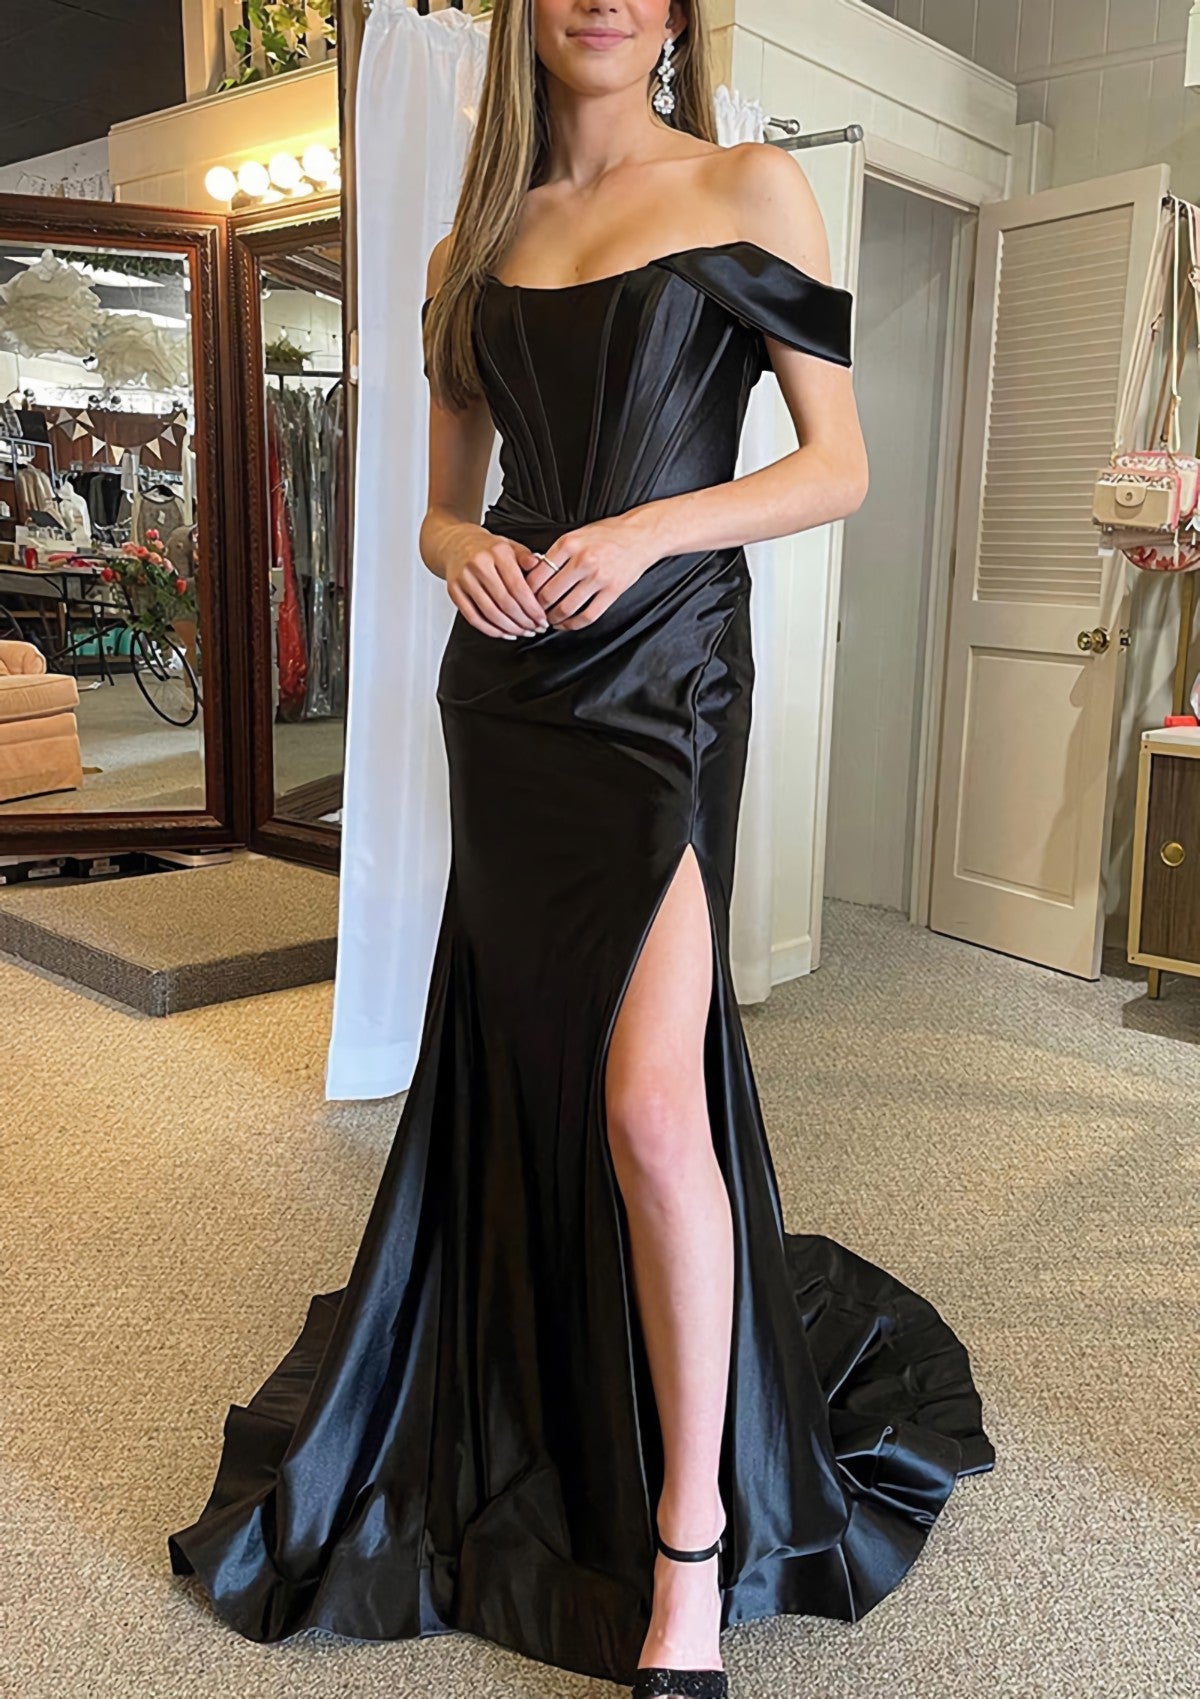 Trumpet/Mermaid Off-the-Shoulder Regular Straps Court Train Silk like Satin Corset Prom Dress With Pleated Split outfit, Bridesmaids Dress With Lace